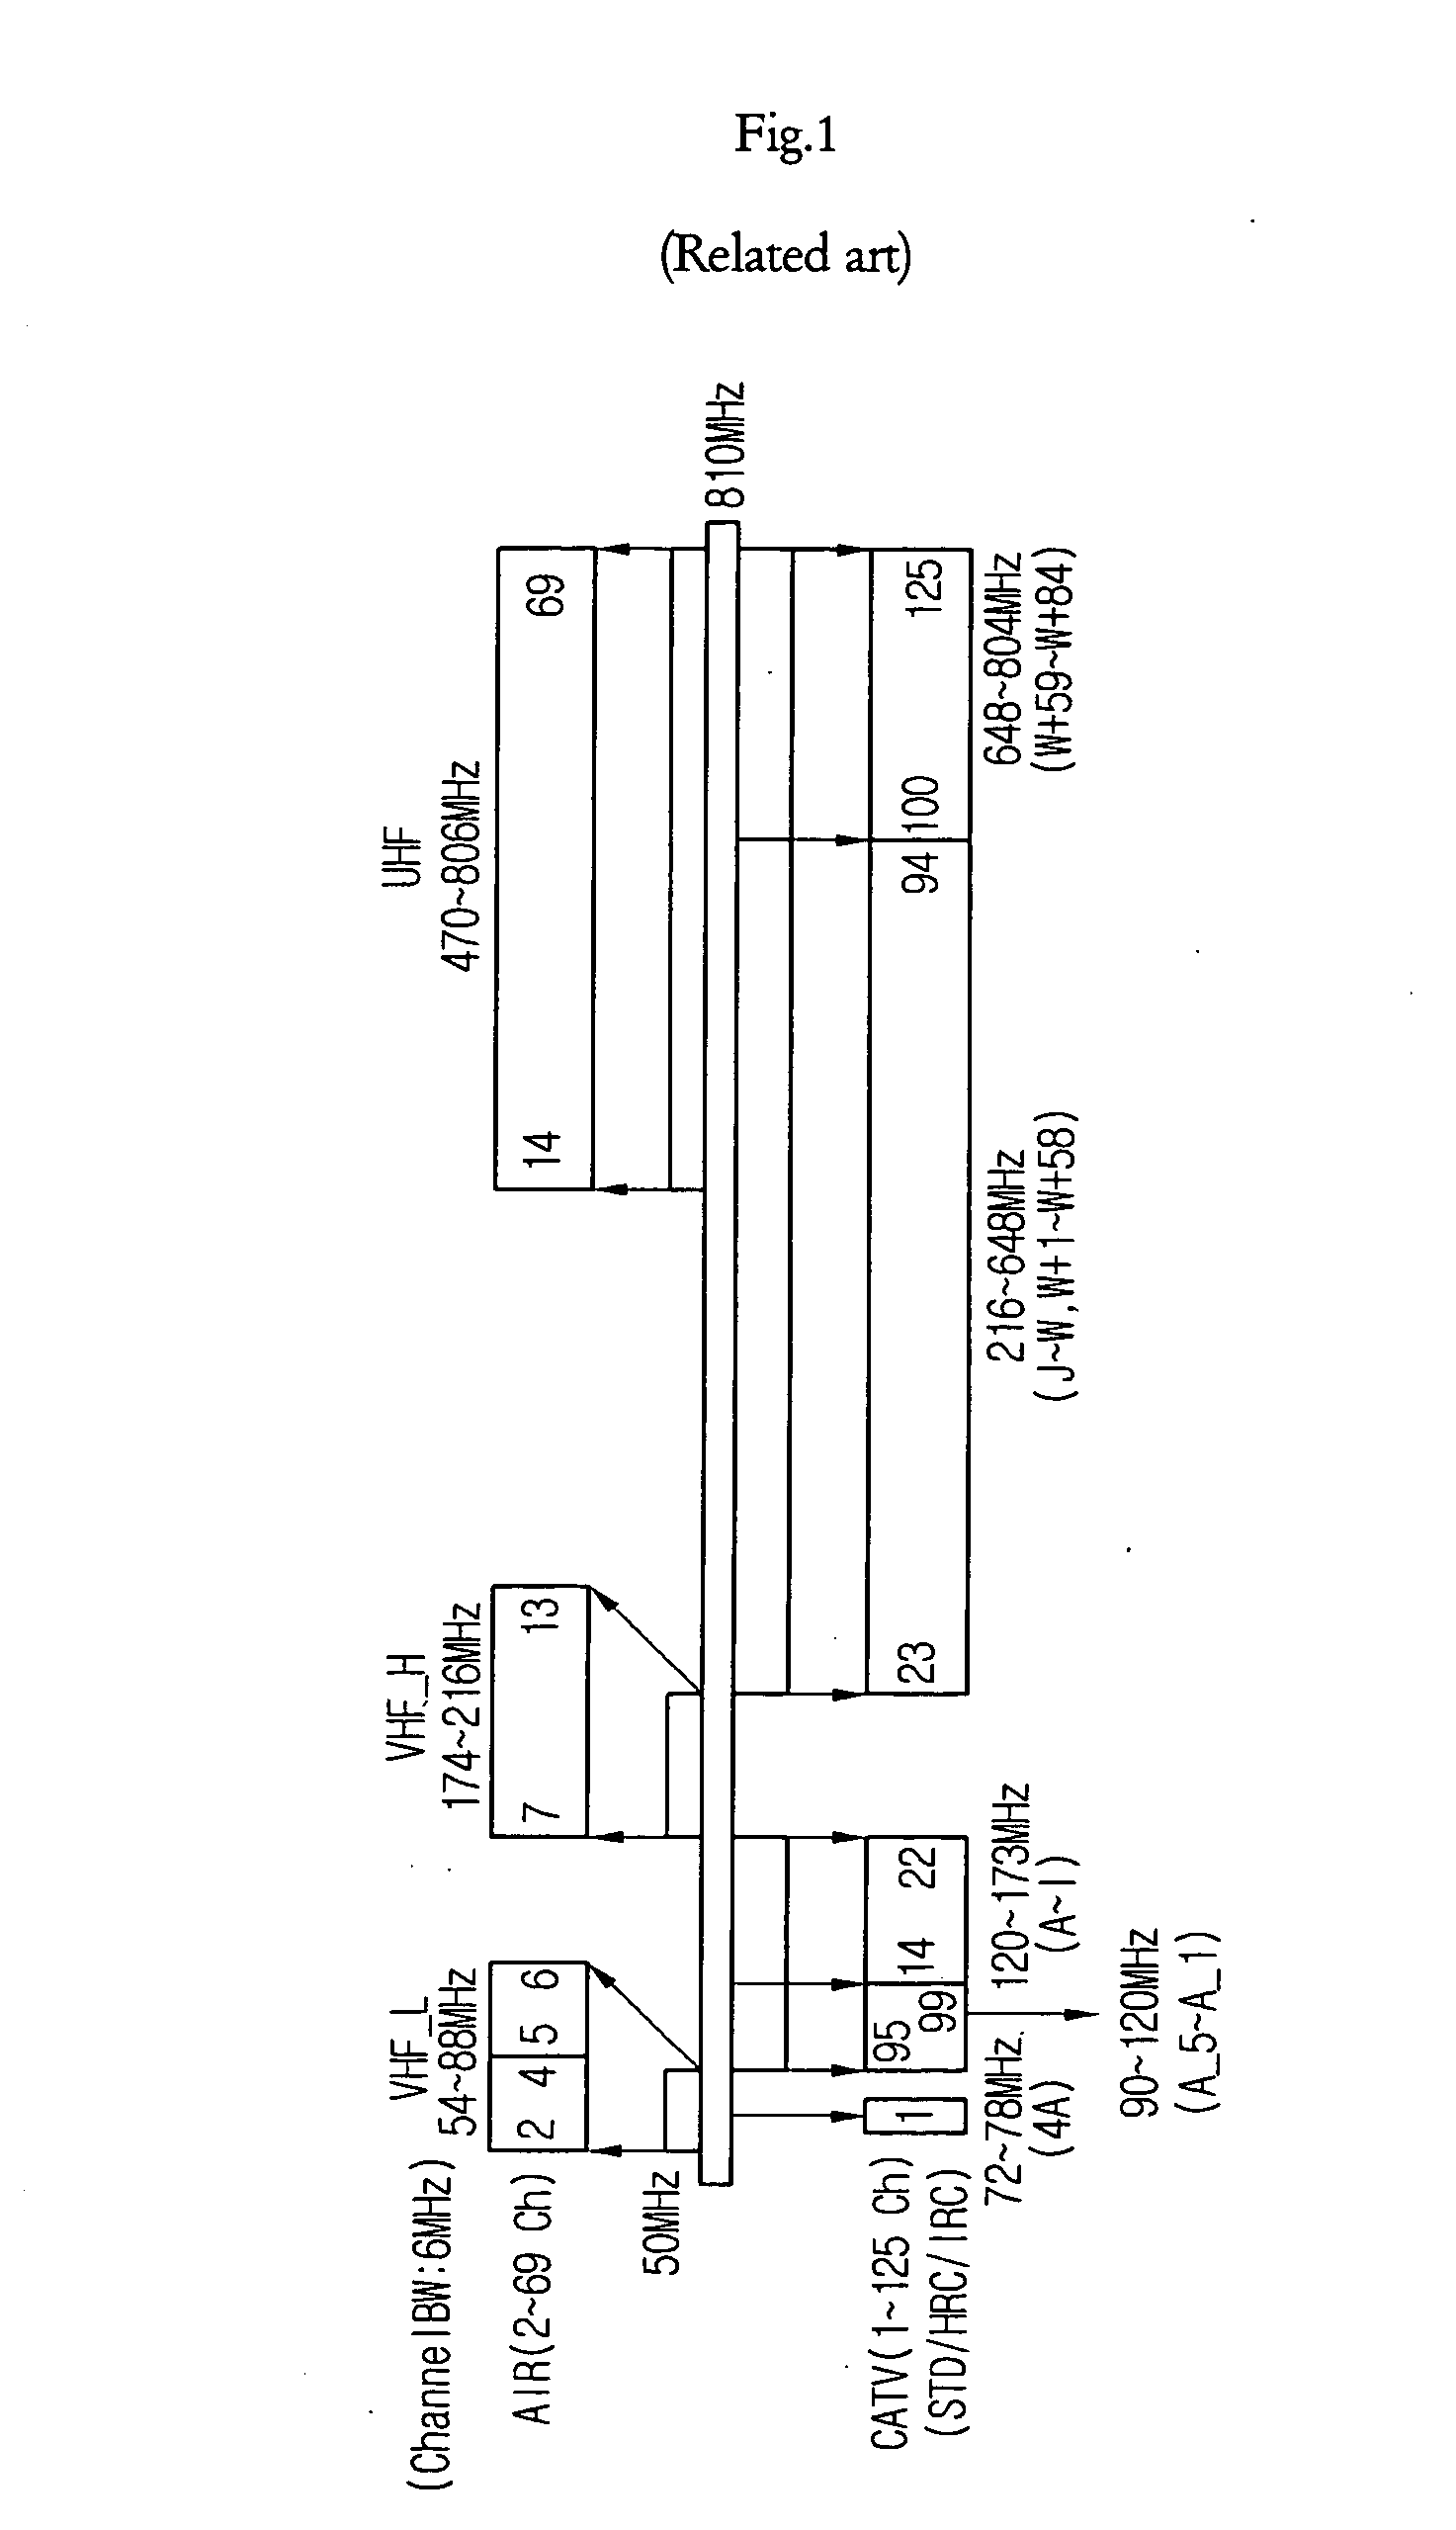 Digital TV and channel setting method thereof